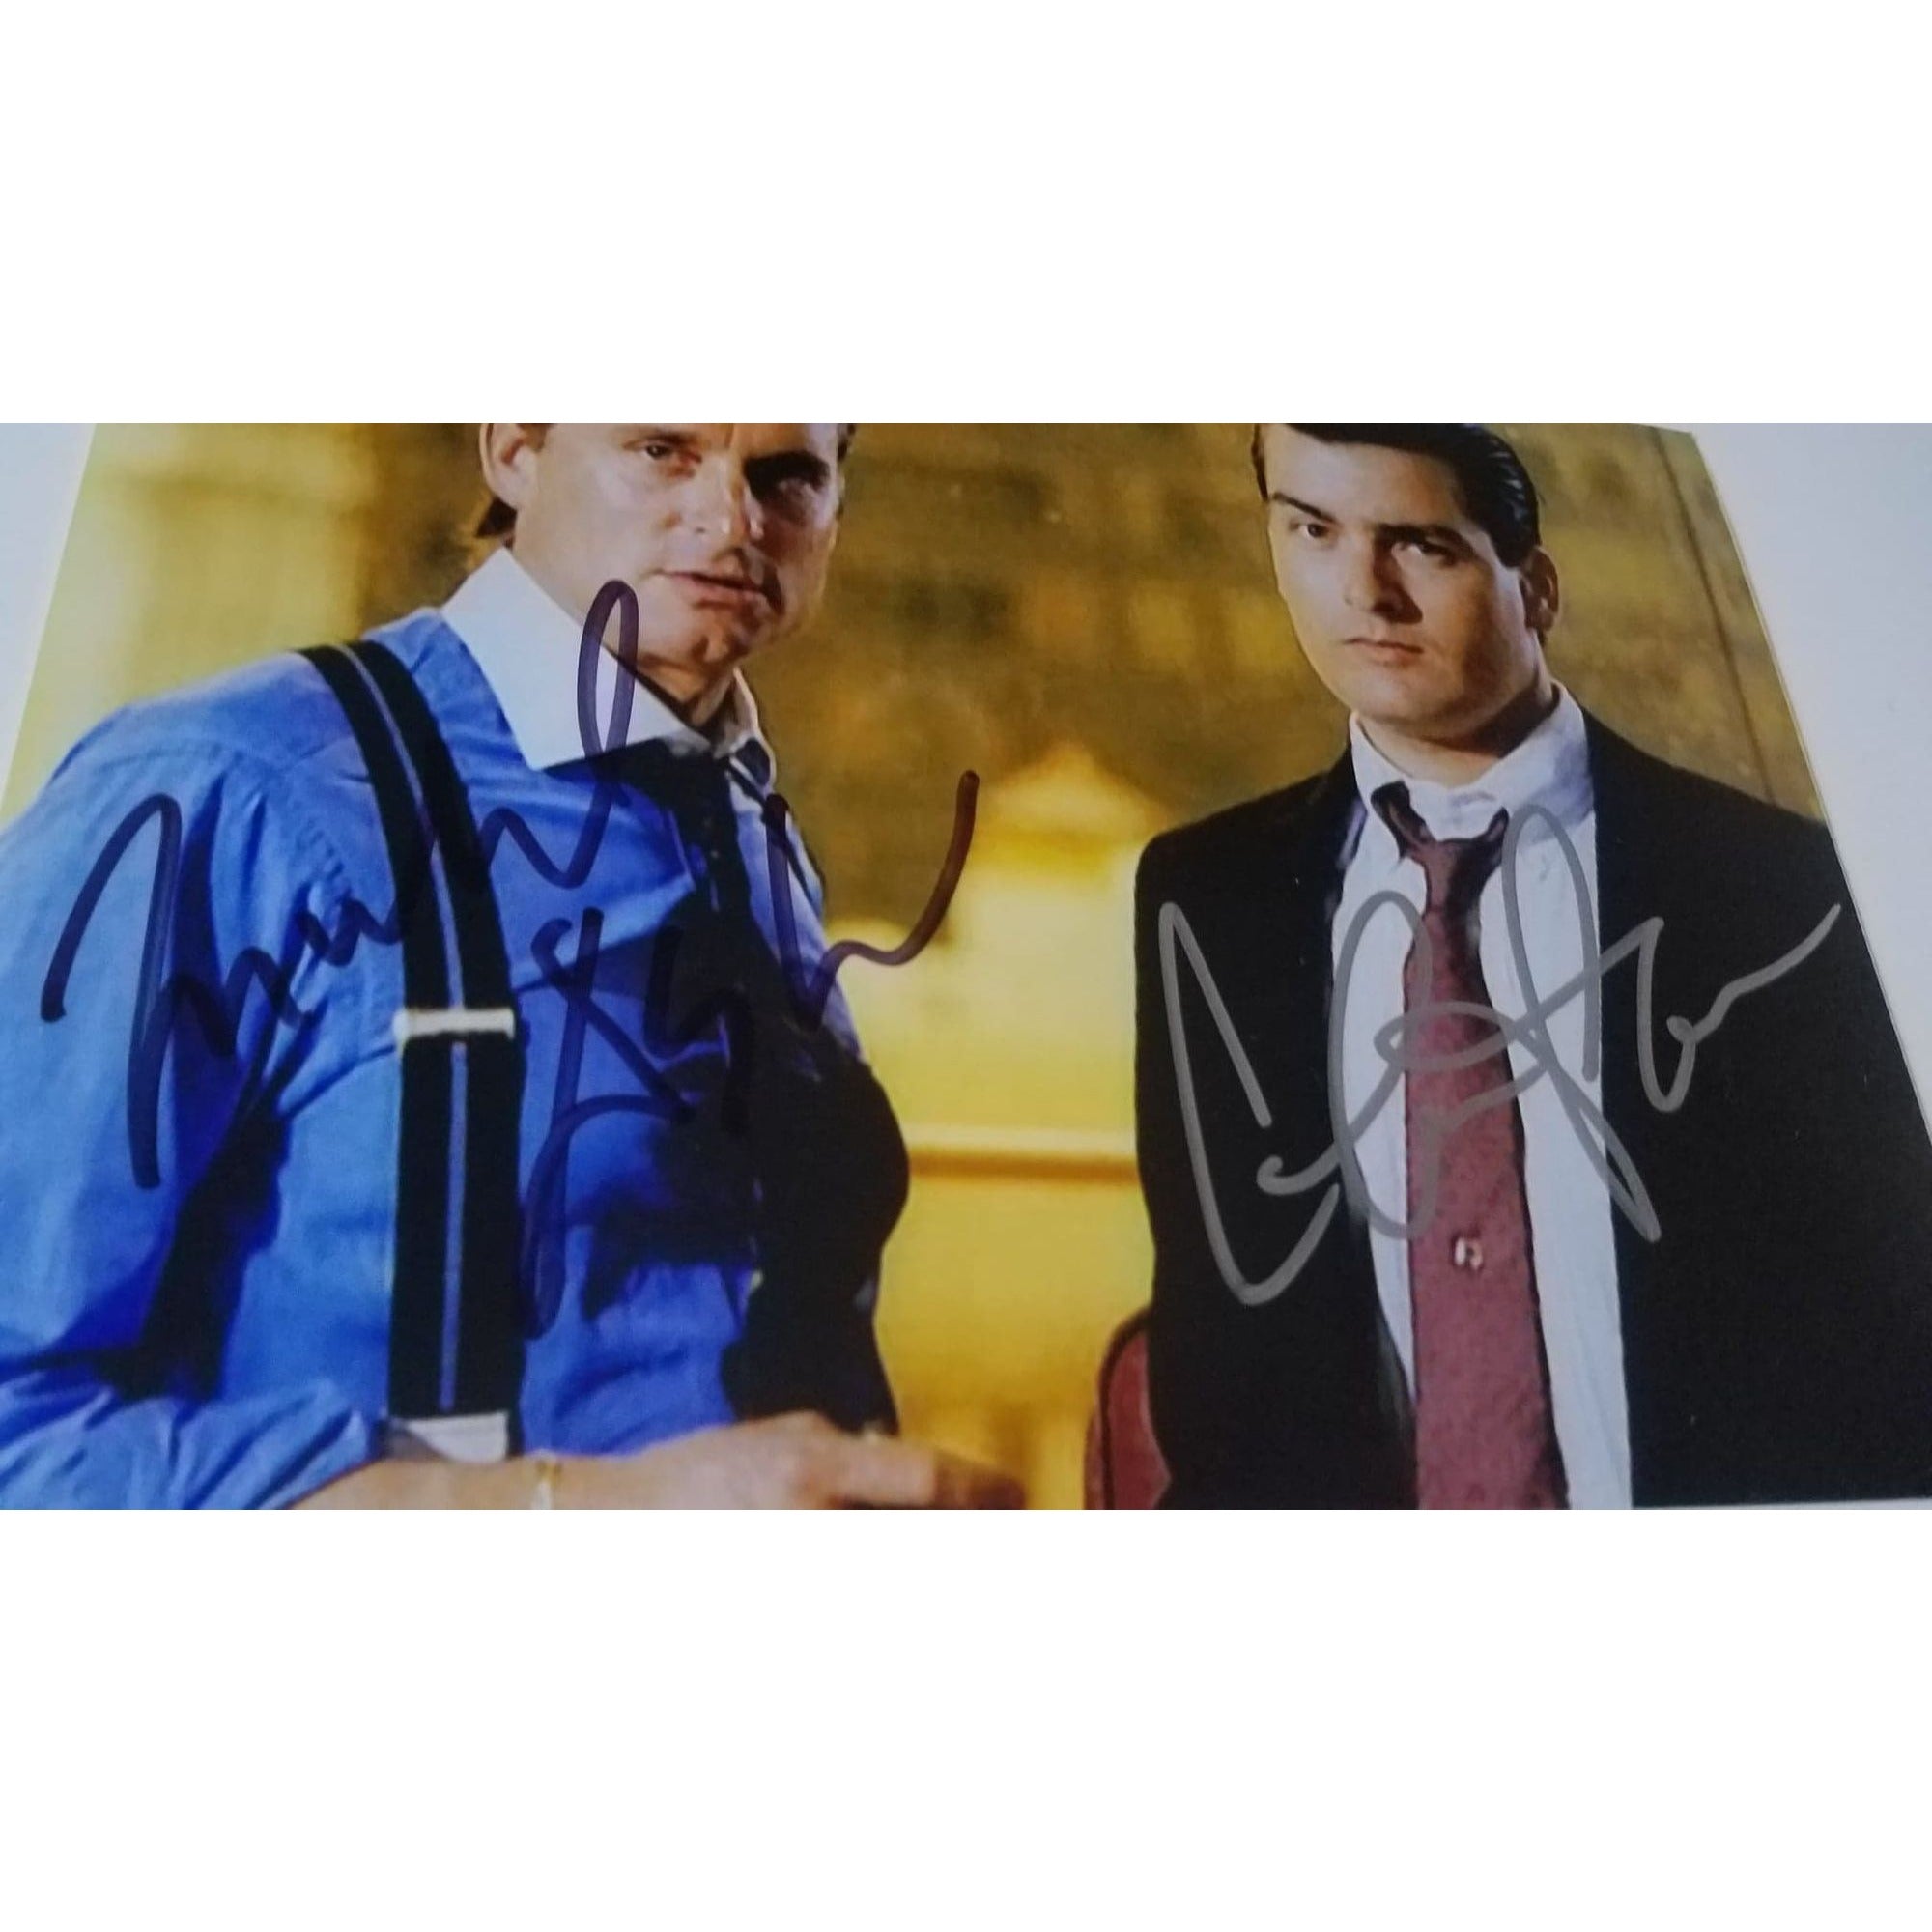 Wall Street Michael Douglas and Charlie Sheen 5 x 7 signed photo